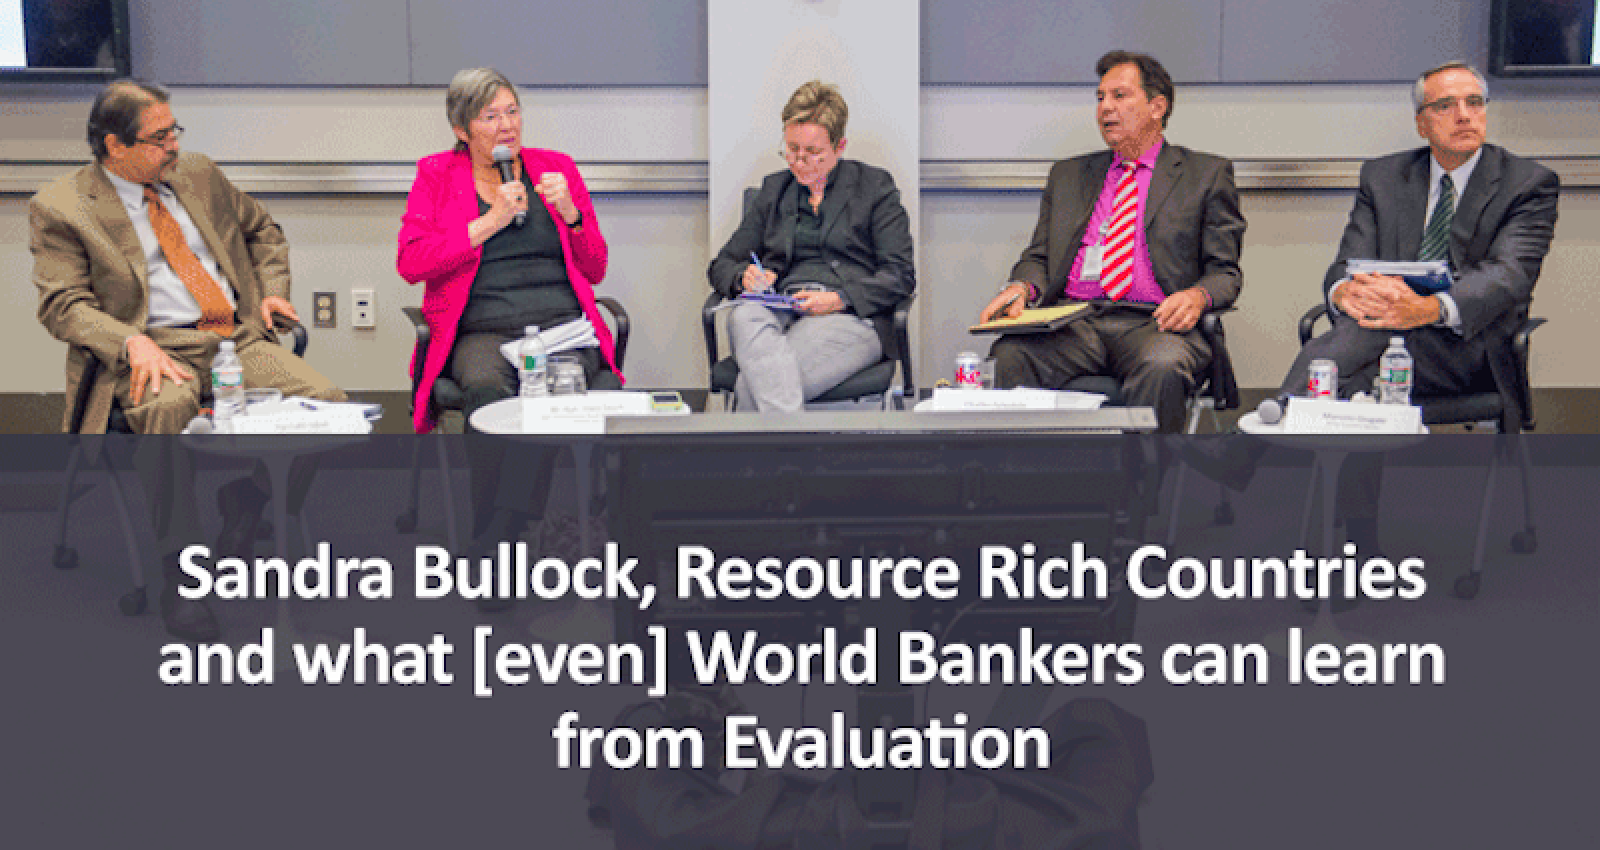 Sandra Bullock, Resource Rich Countries and what [even] World Bankers can learn from Evaluation